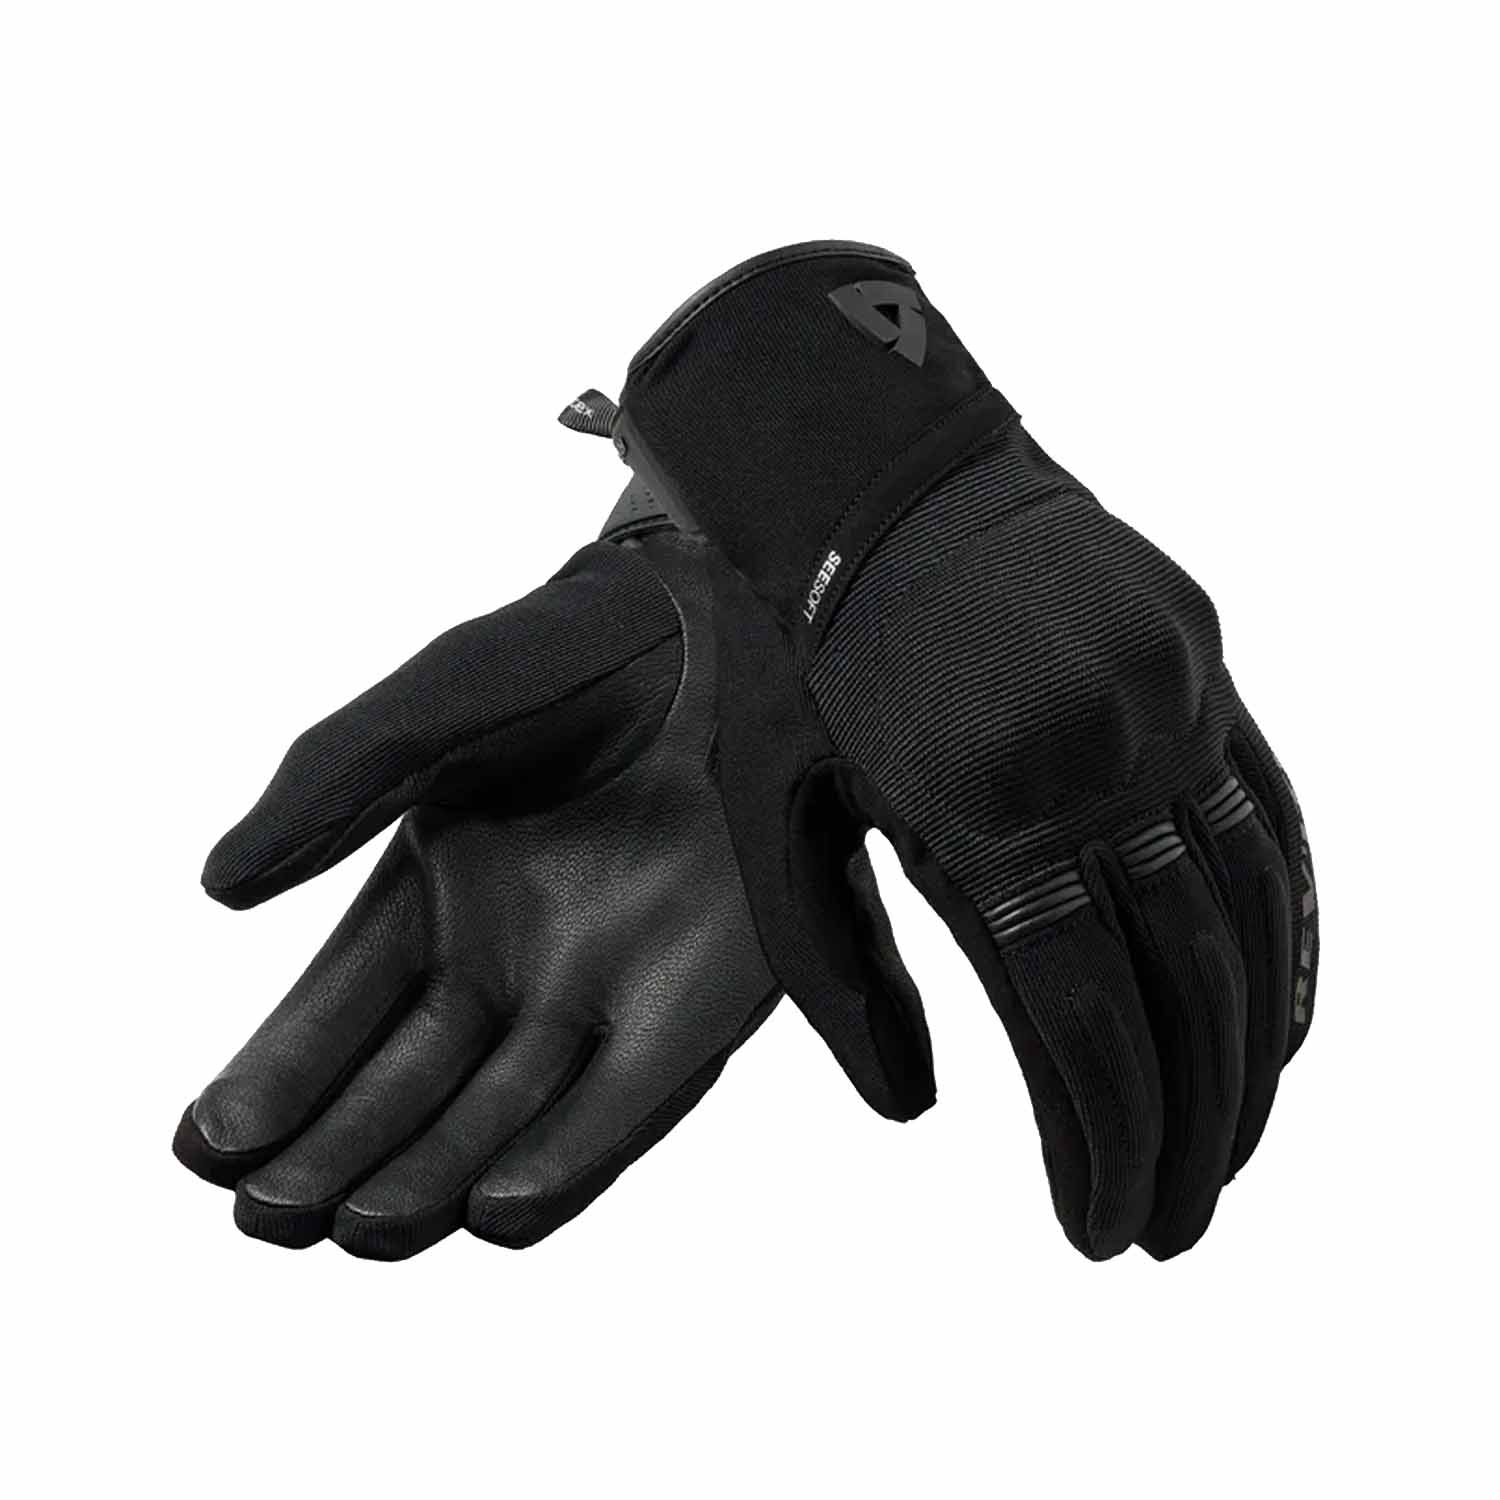 Image of REV'IT! Mosca 2 H2O Gloves Ladies Black Taille M